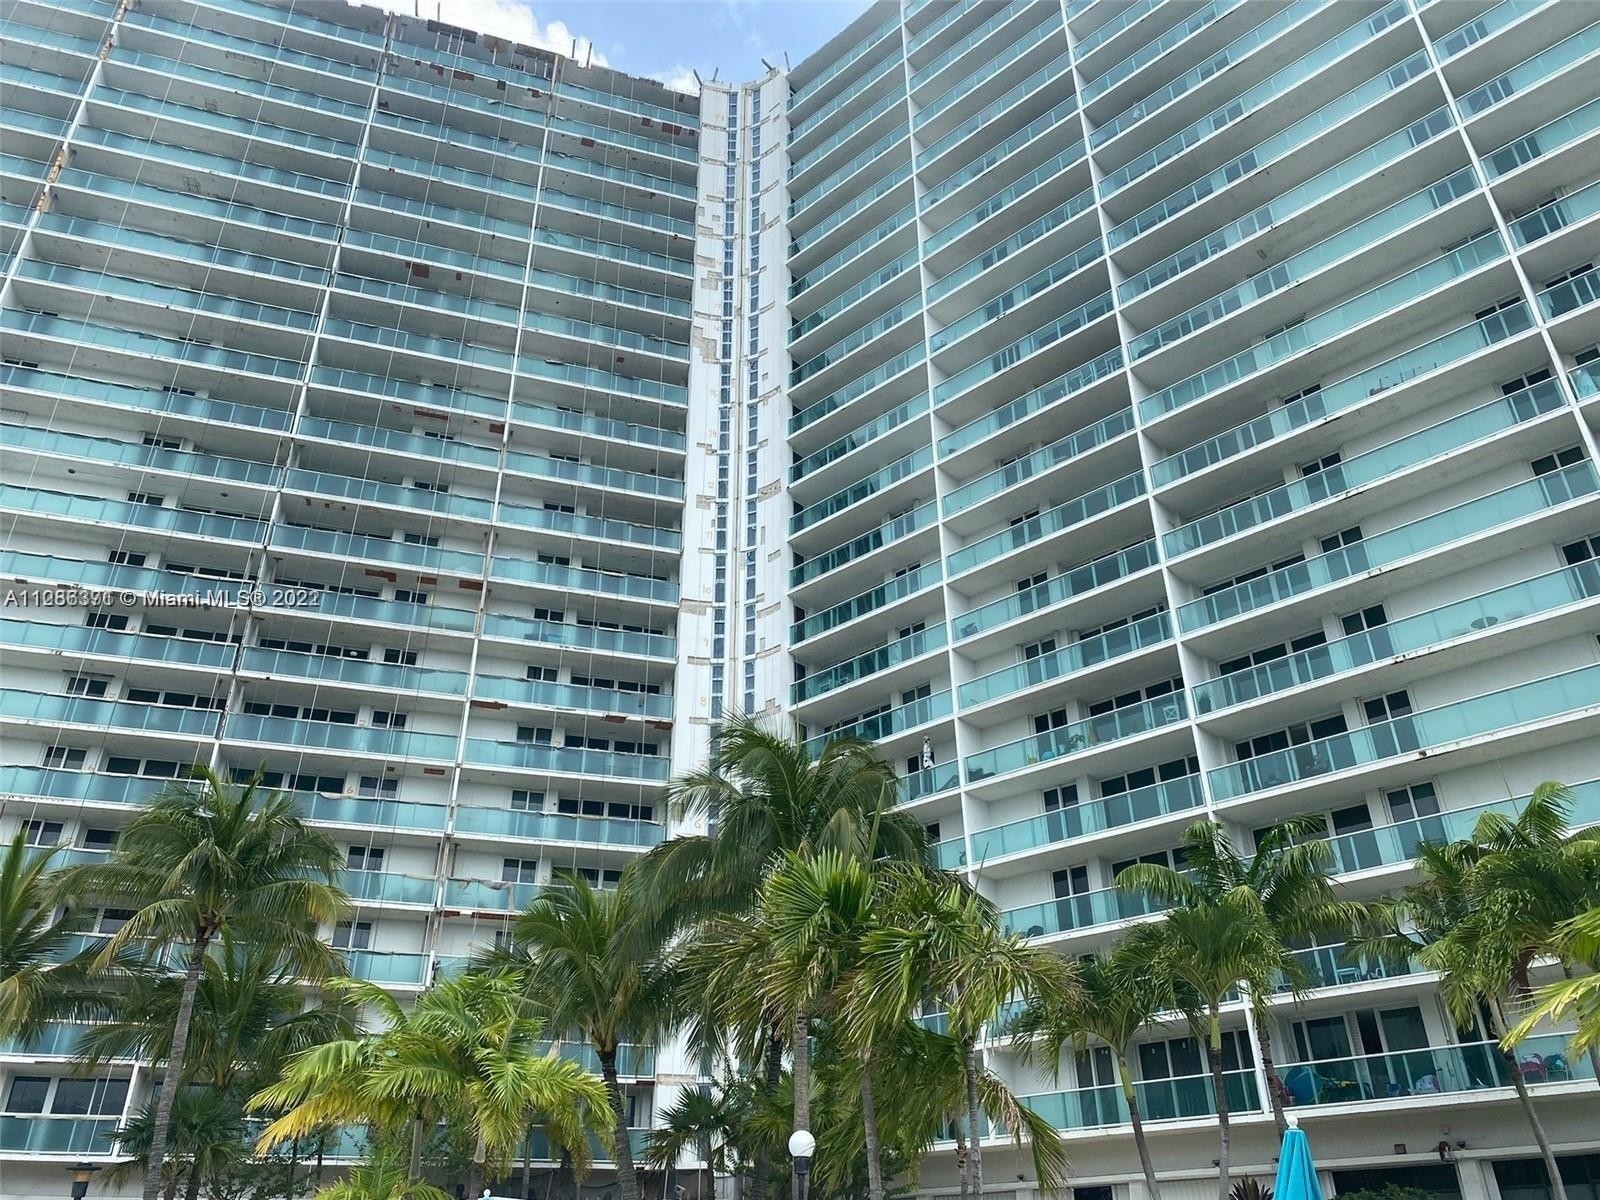 Property at 100 Bayview Dr , 1101 Sunny Isles Beach, FL 33160